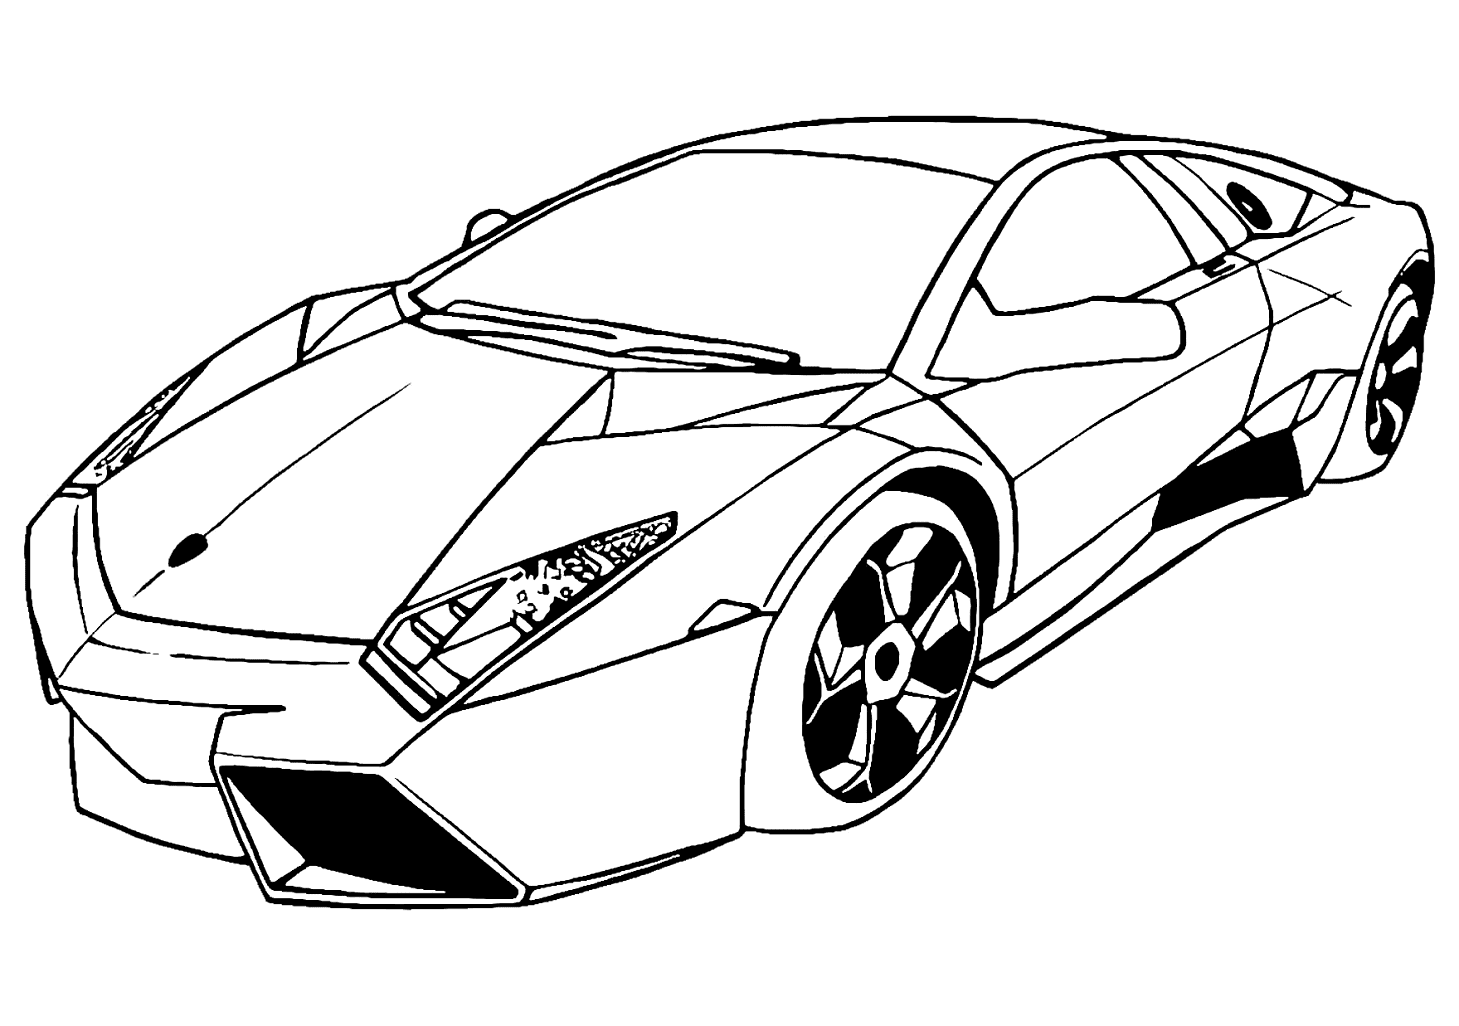 Race Car to Print Coloring Page